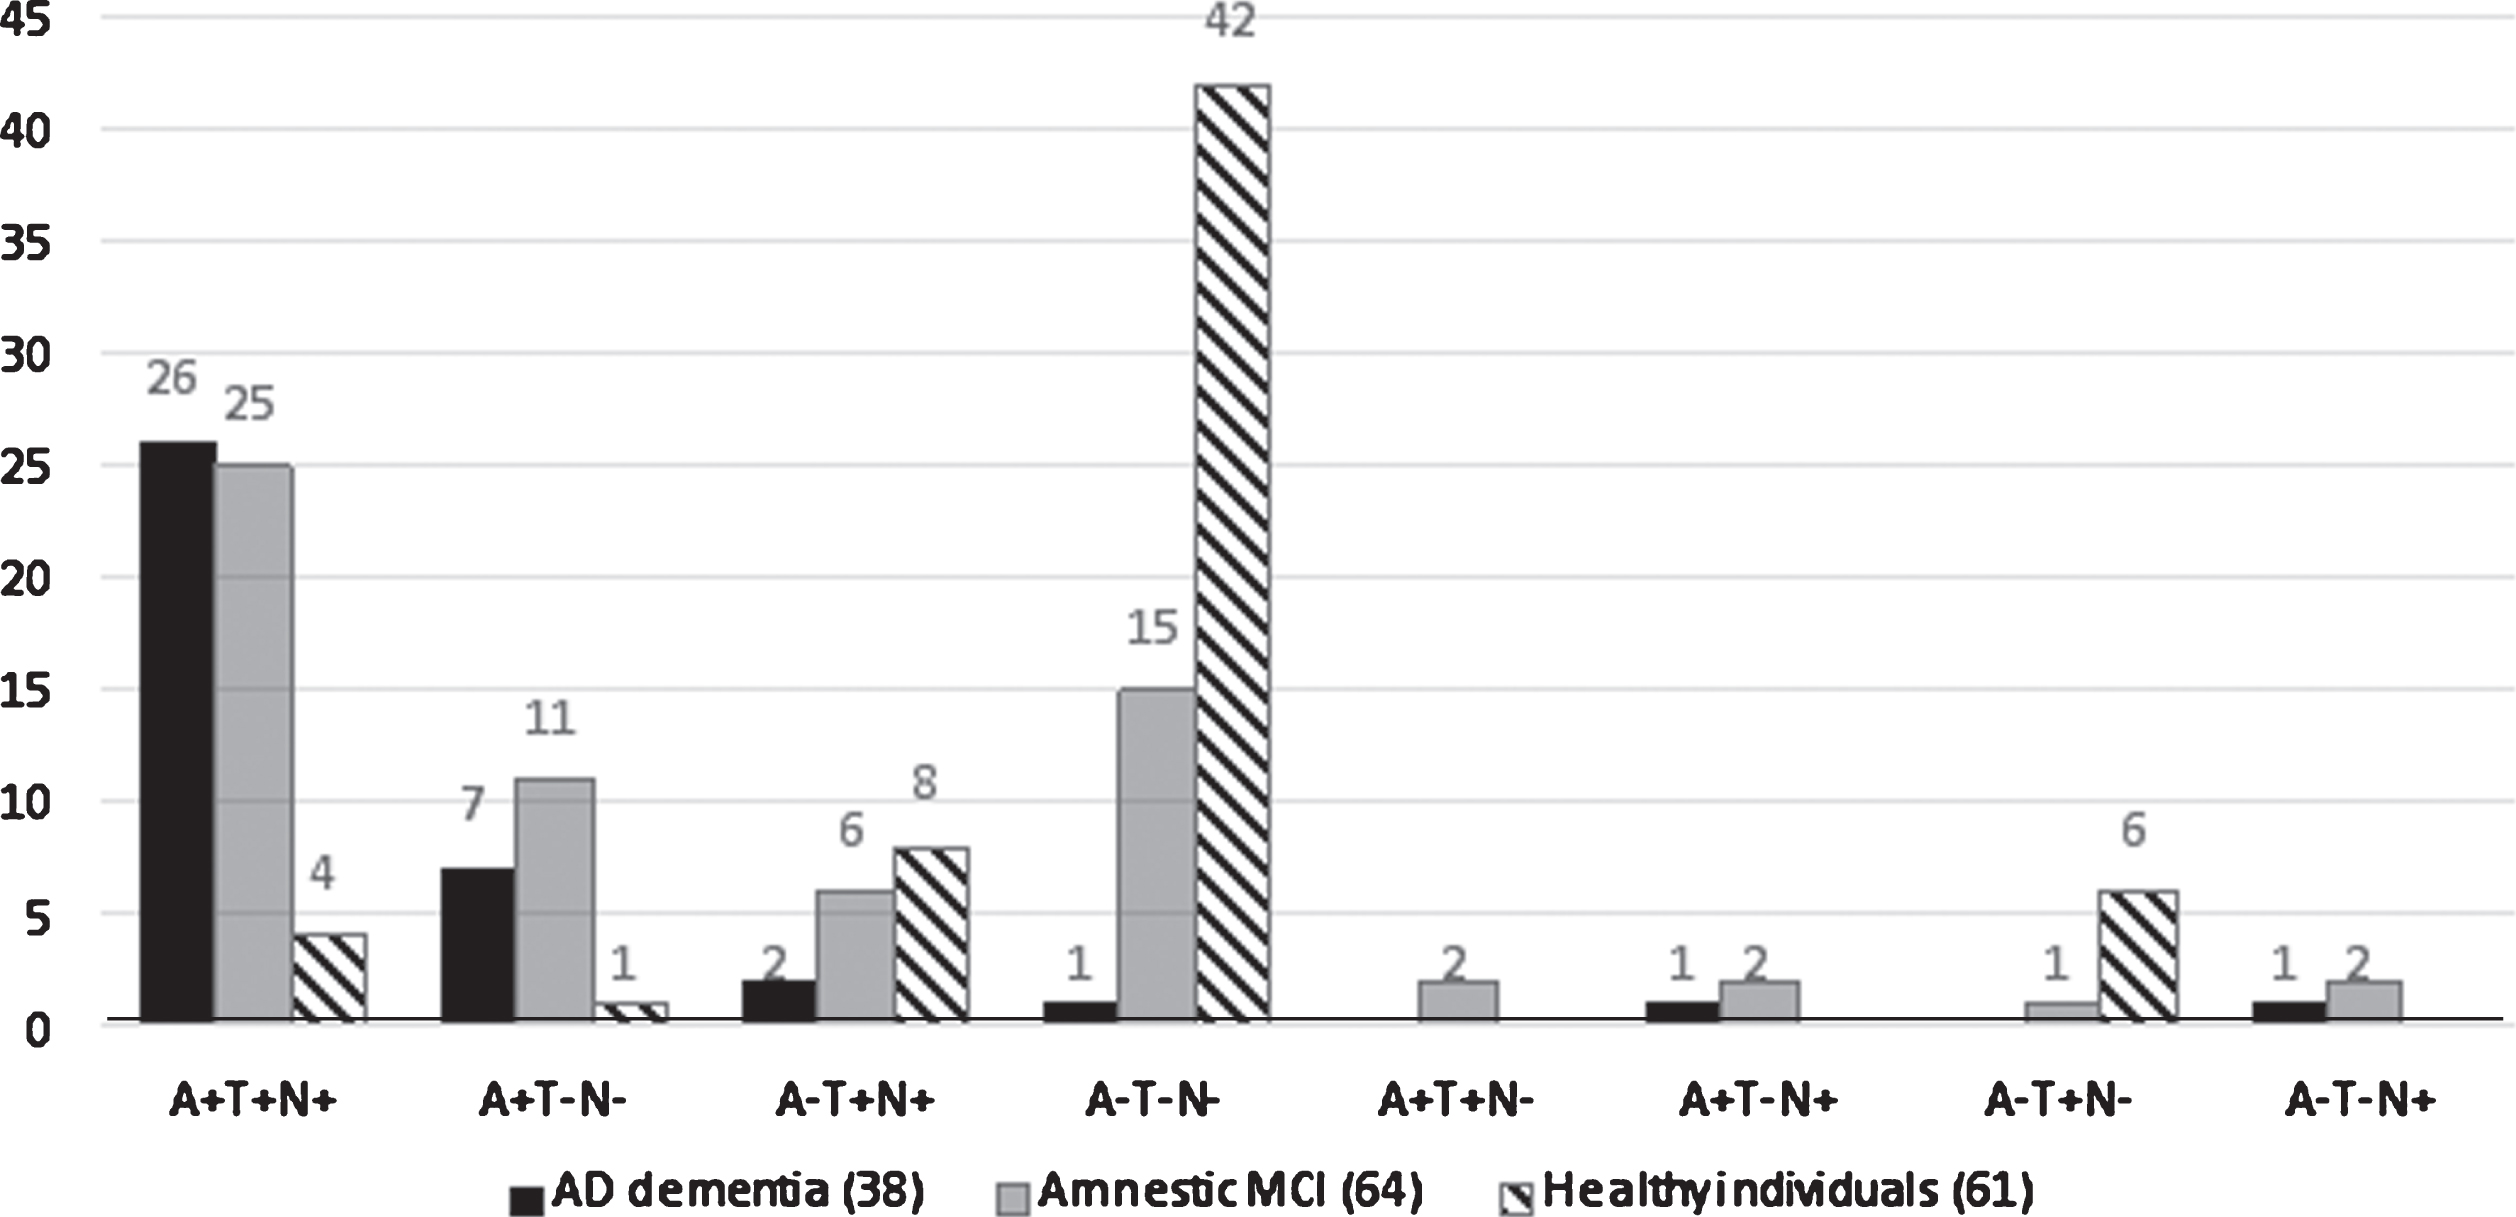 A retrospective application of A/T/N to the clinical groups at baseline. AD, Alzheimer’s disease; MCI, mild cognitive impairment. The figures over the histogram columns represent the number of individuals.